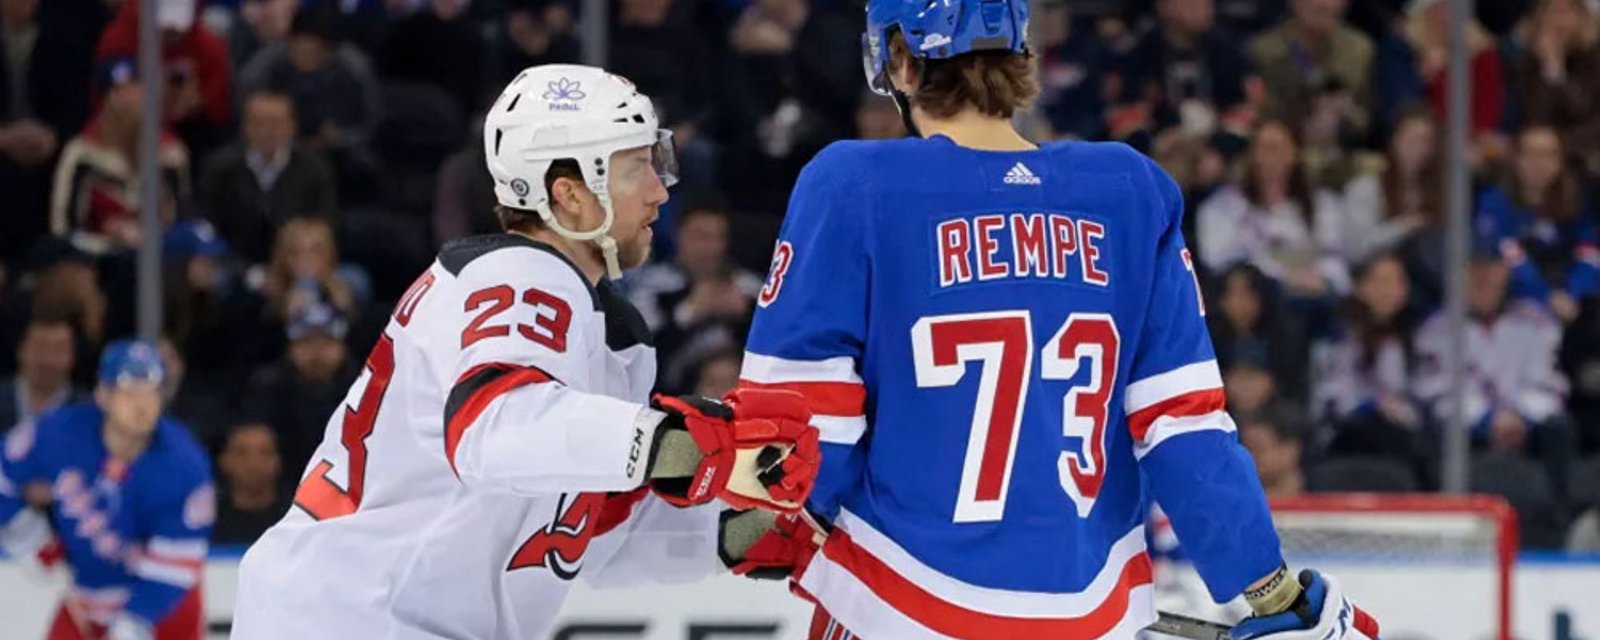 Devils fans threaten Rempe's family and make fun of his deceased Dad